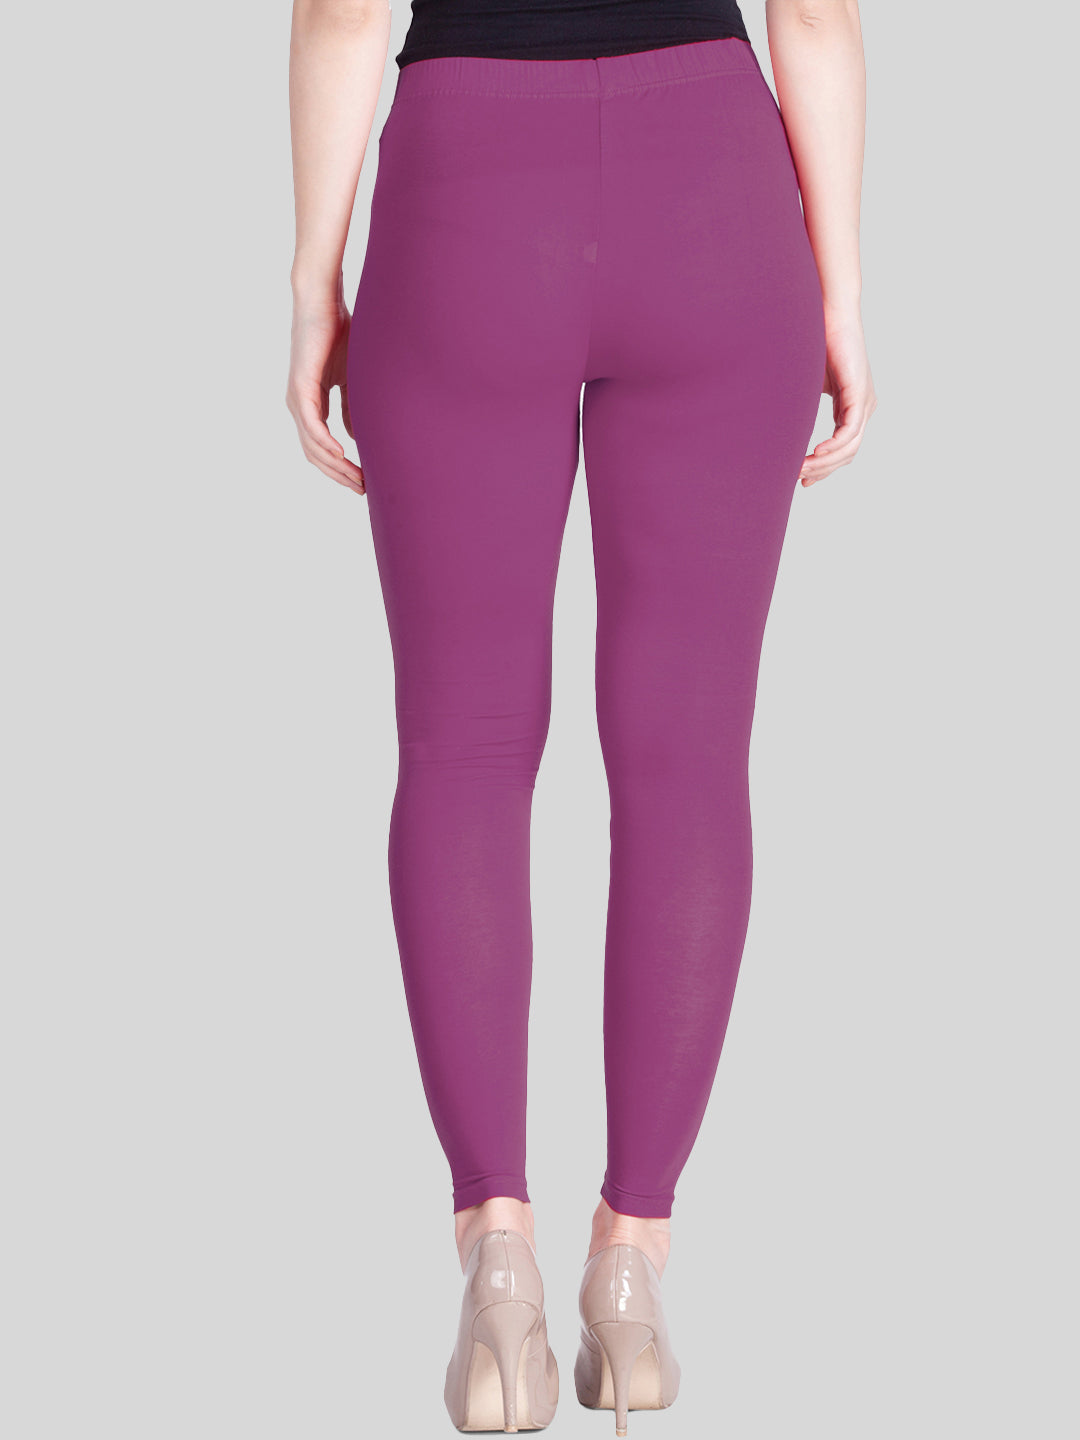 Buy Lux Lyra Women's Slim Fit Cotton Leggings (LYRA_AL_FS_1PC_Purple, Dark  Violet_Free Size) Online In India At Discounted Prices